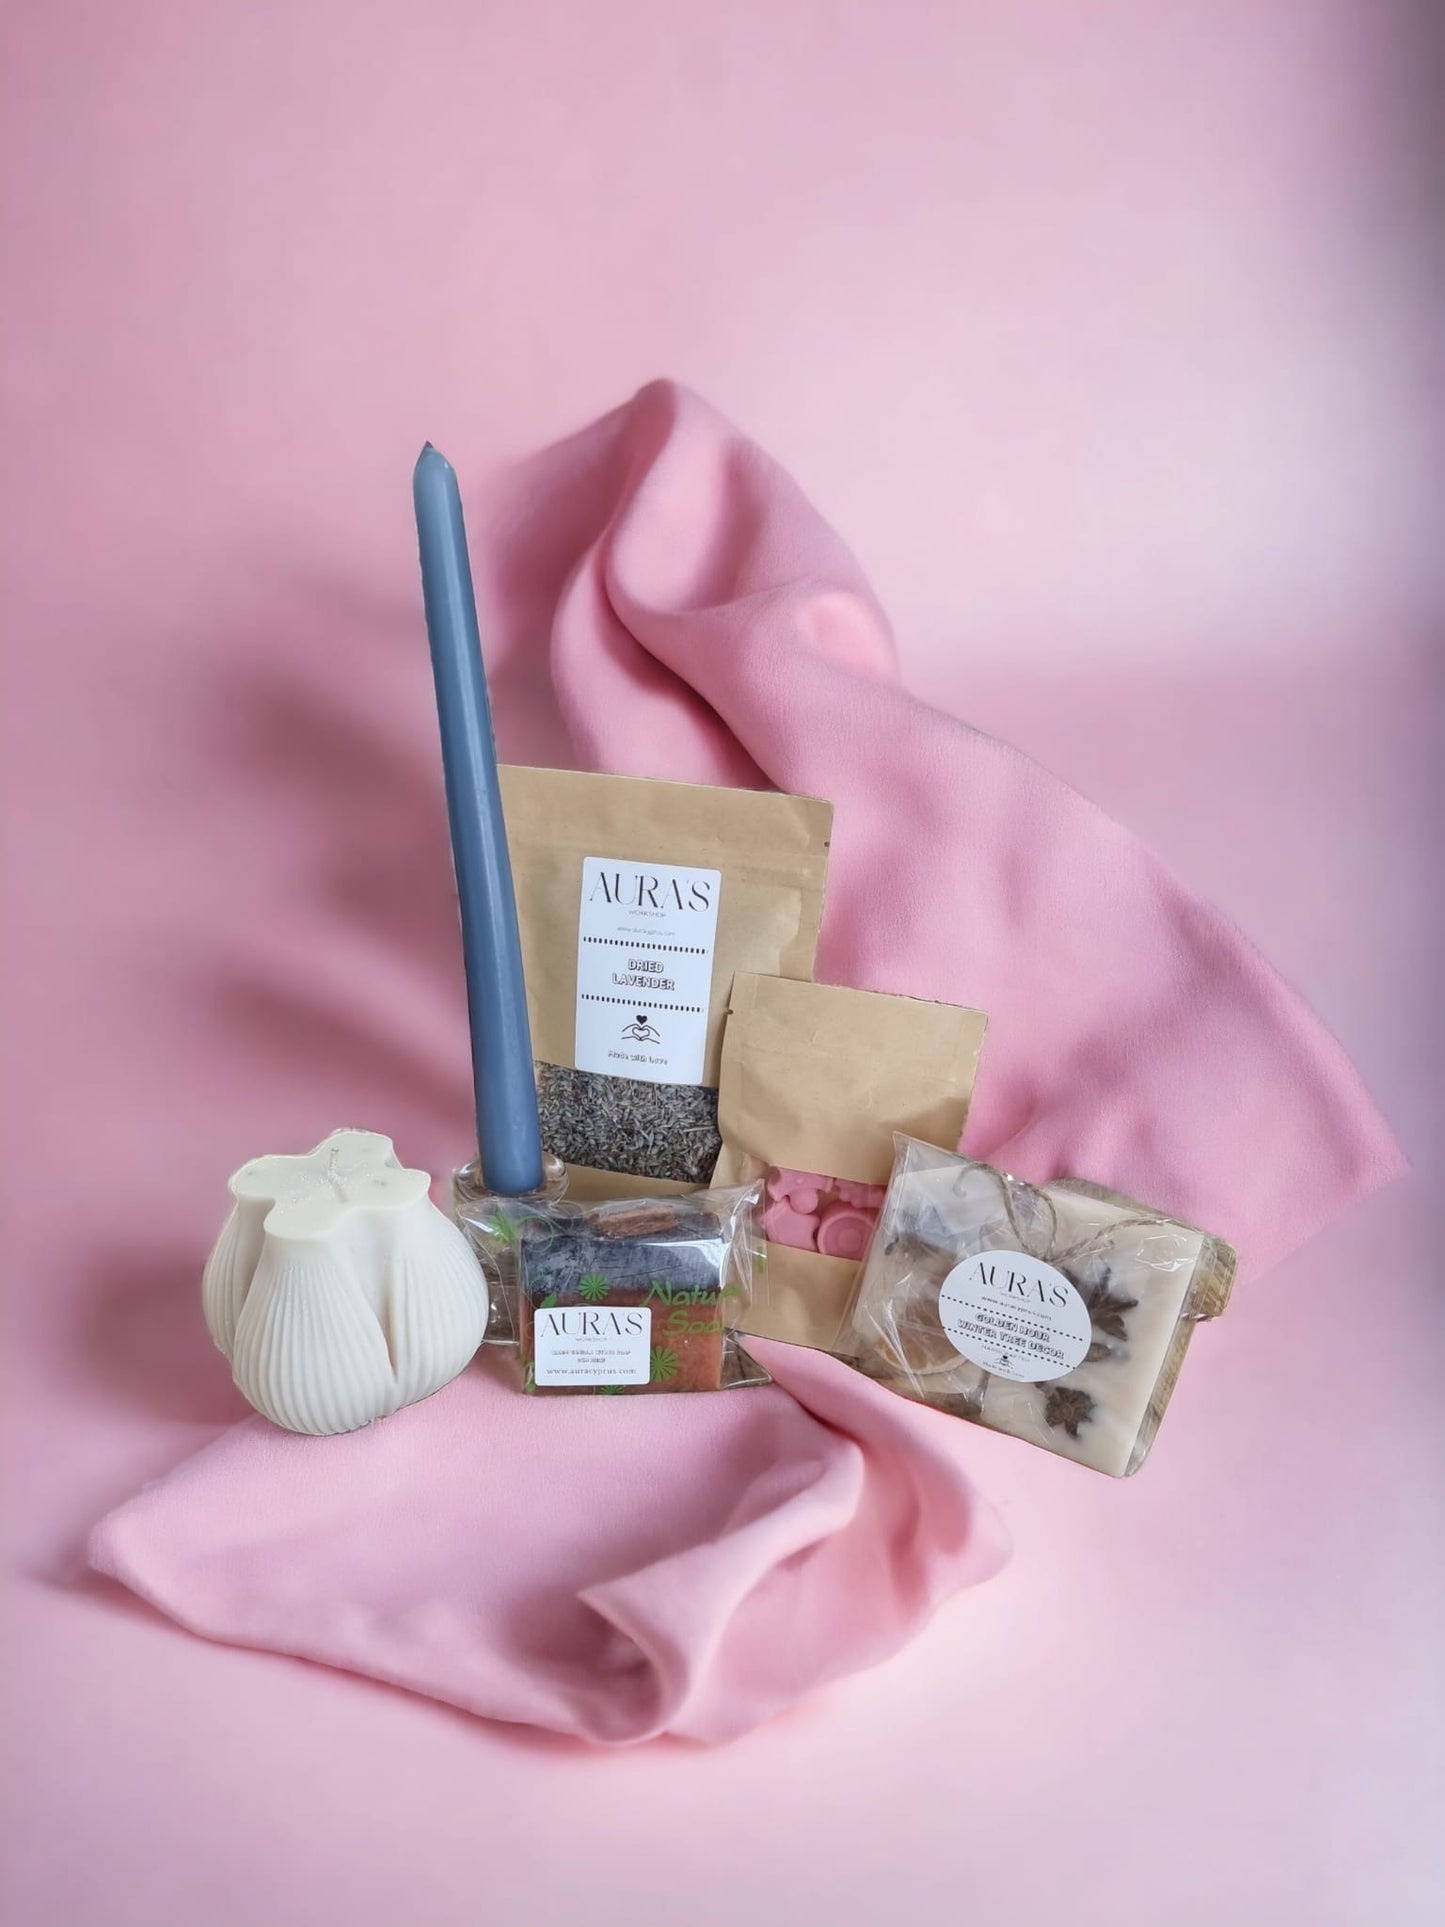 Valentine's Gift Set: Candle, Wax Melts, Soap, Dried Lavender, Candle Pillar Holder & Pillar Candle - Auras Workshop  -  Gifts -   - Cyprus & Greece - Wholesale - Retail #